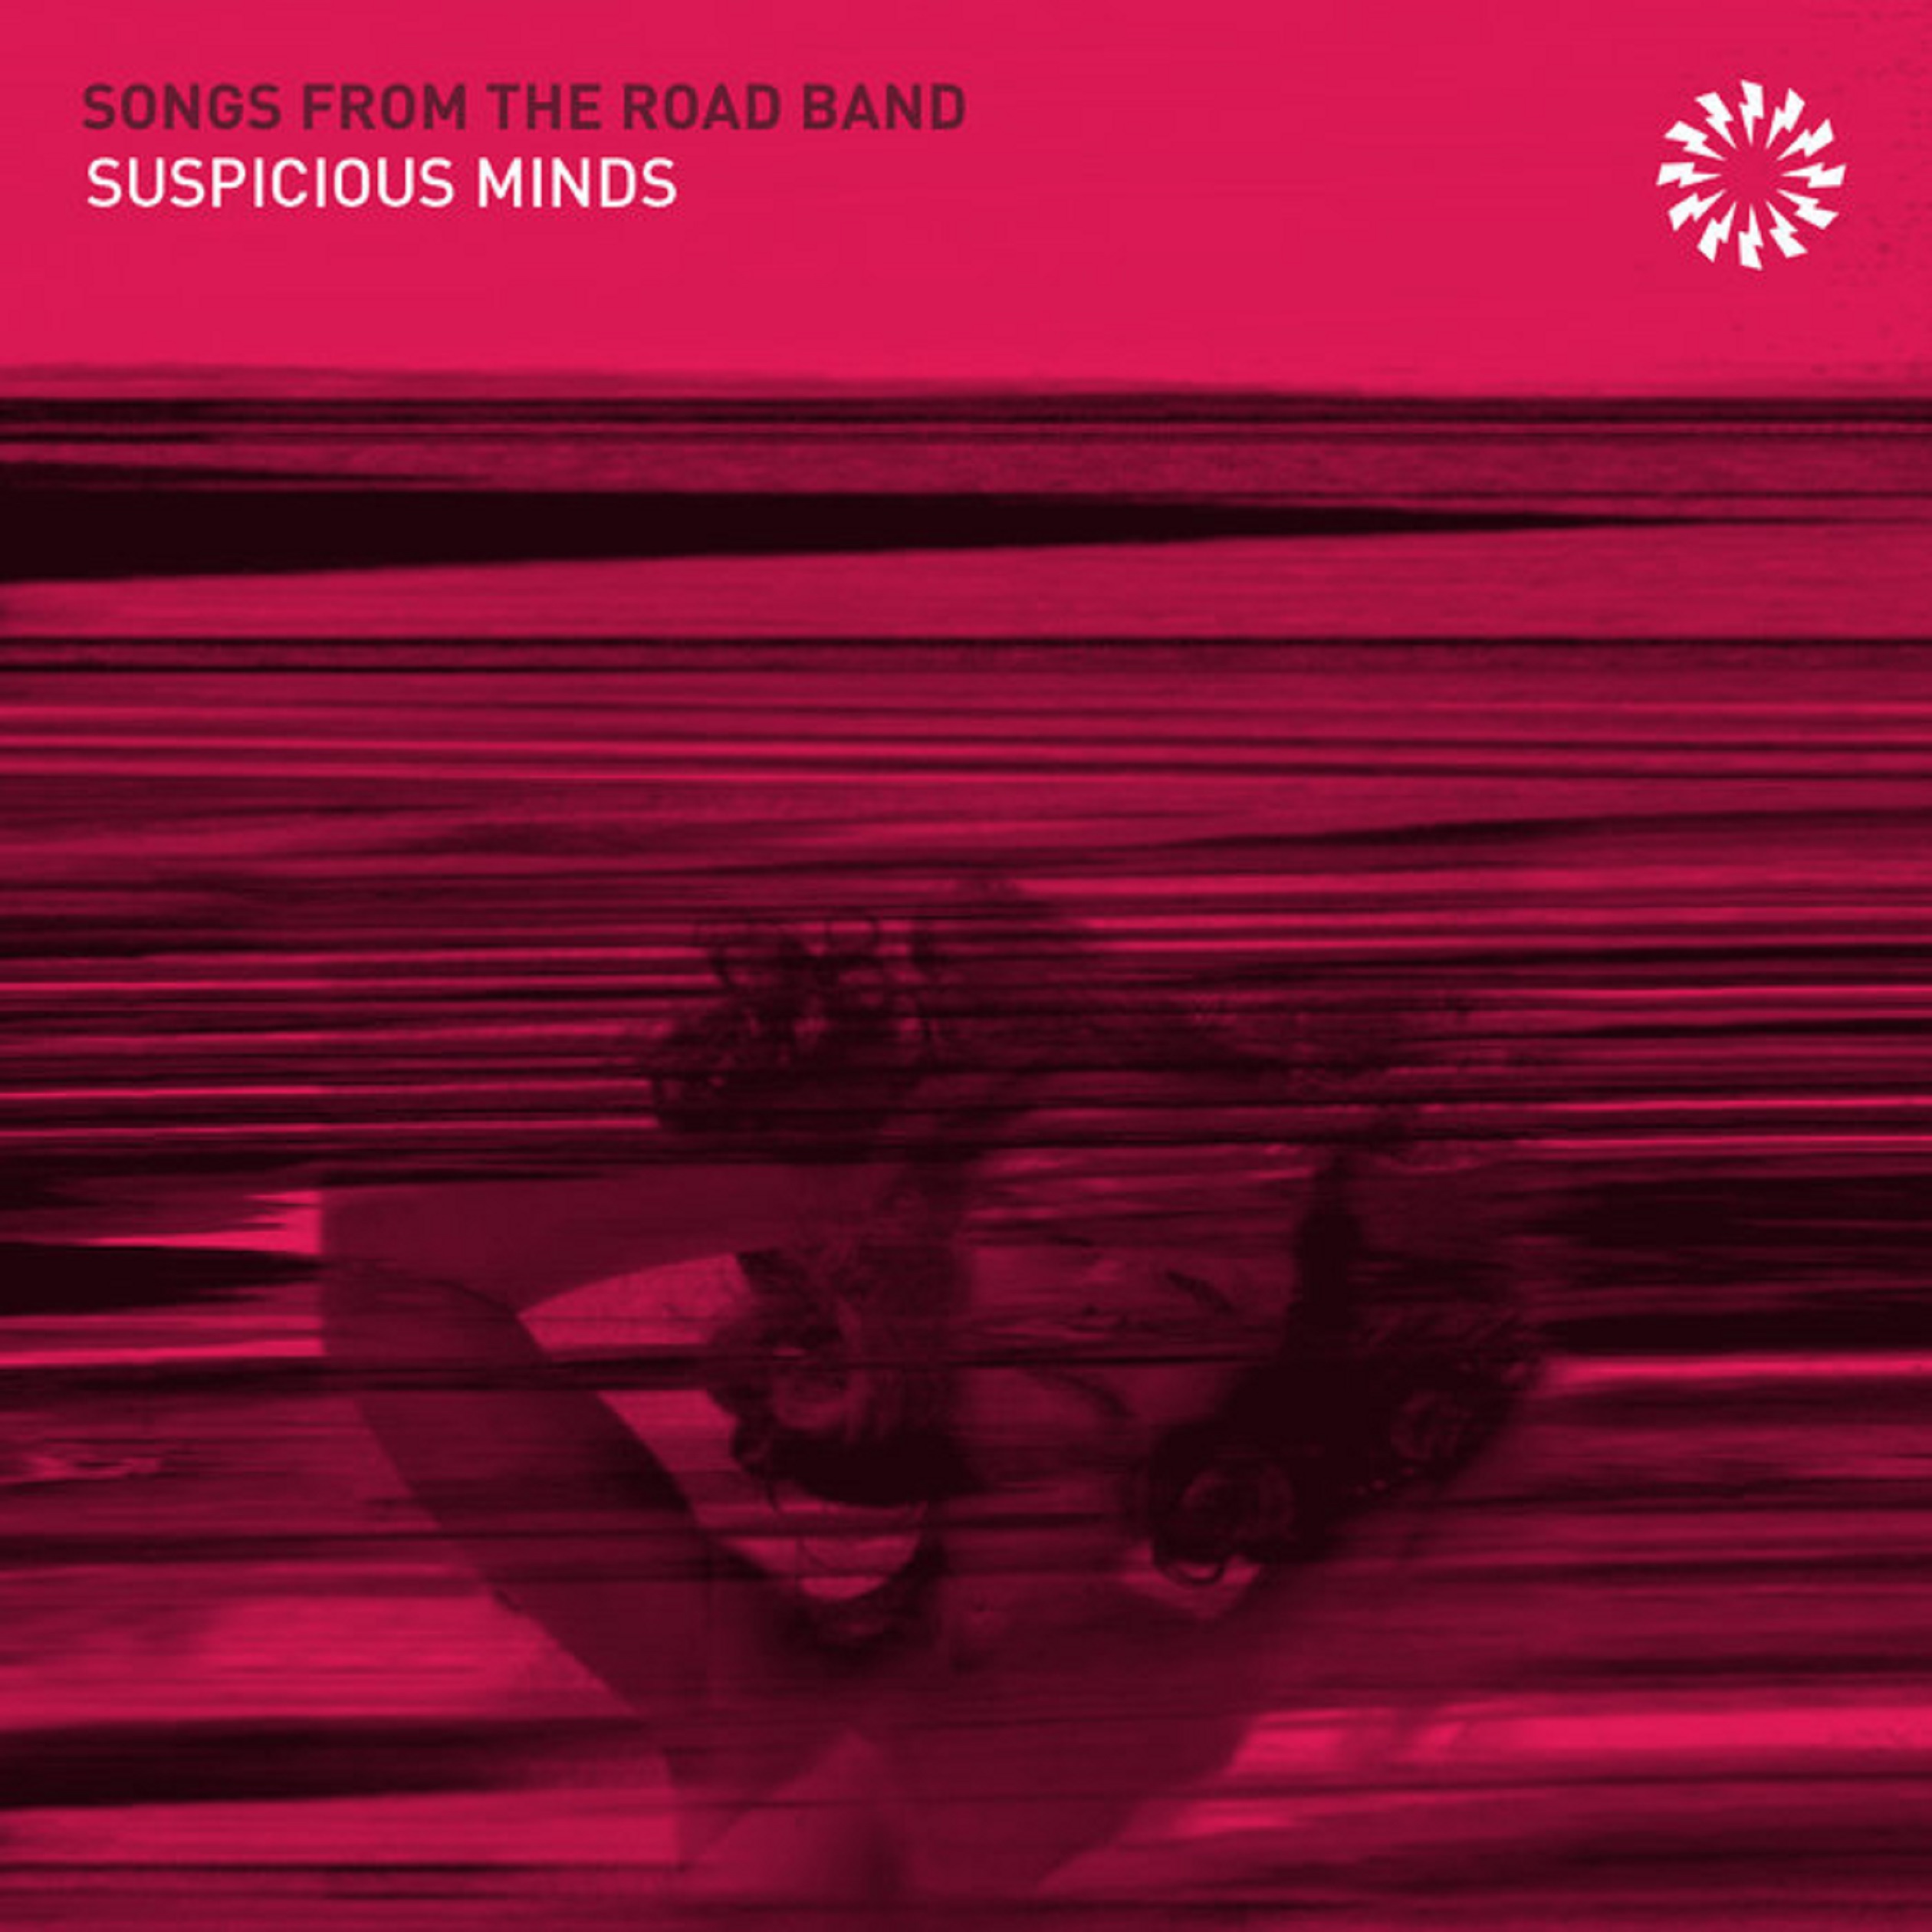  Songs From the Road Band: Suspicious Minds